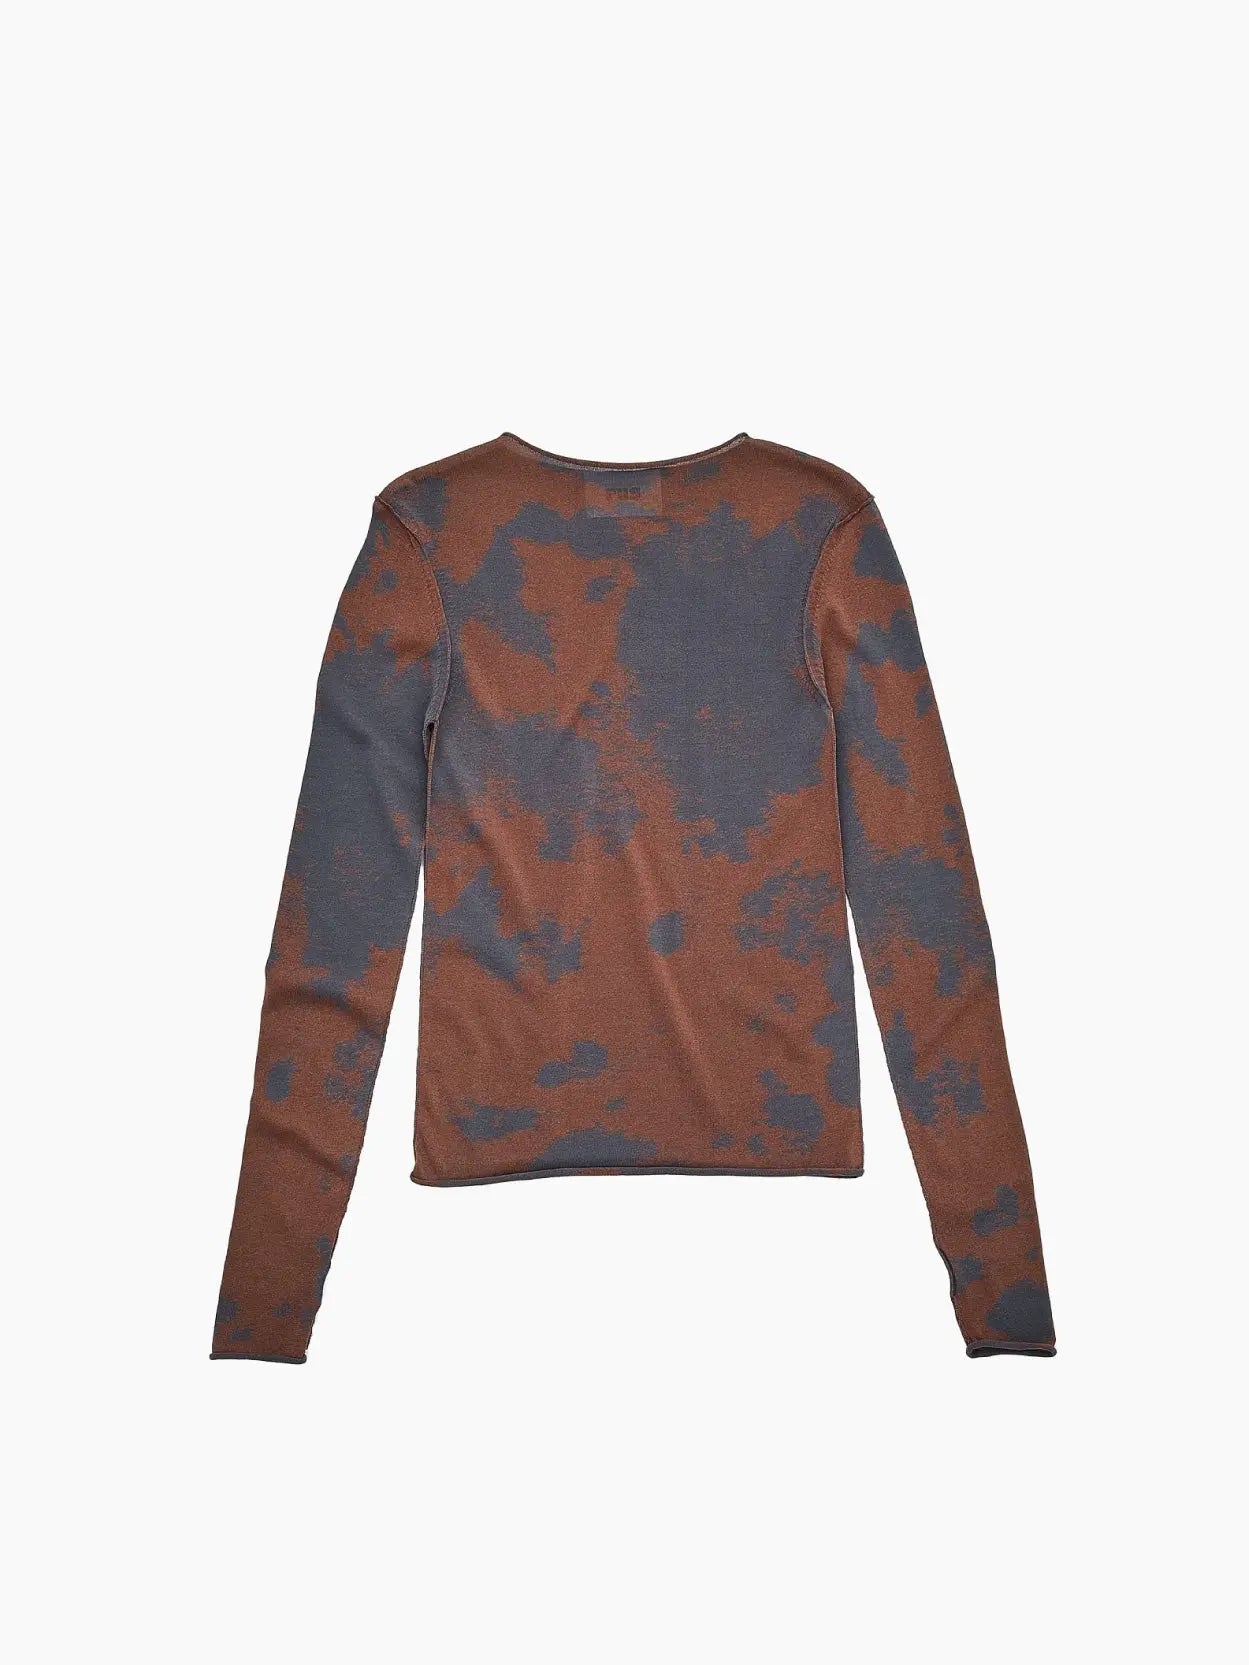 A long-sleeve shirt with a tie-dye pattern in brown and gray hues, displayed flat against a white background. The Ai Sweater Marengo by Rus, available at Bassalstore, has a round neckline and appears to be made of a soft, stretchy material.